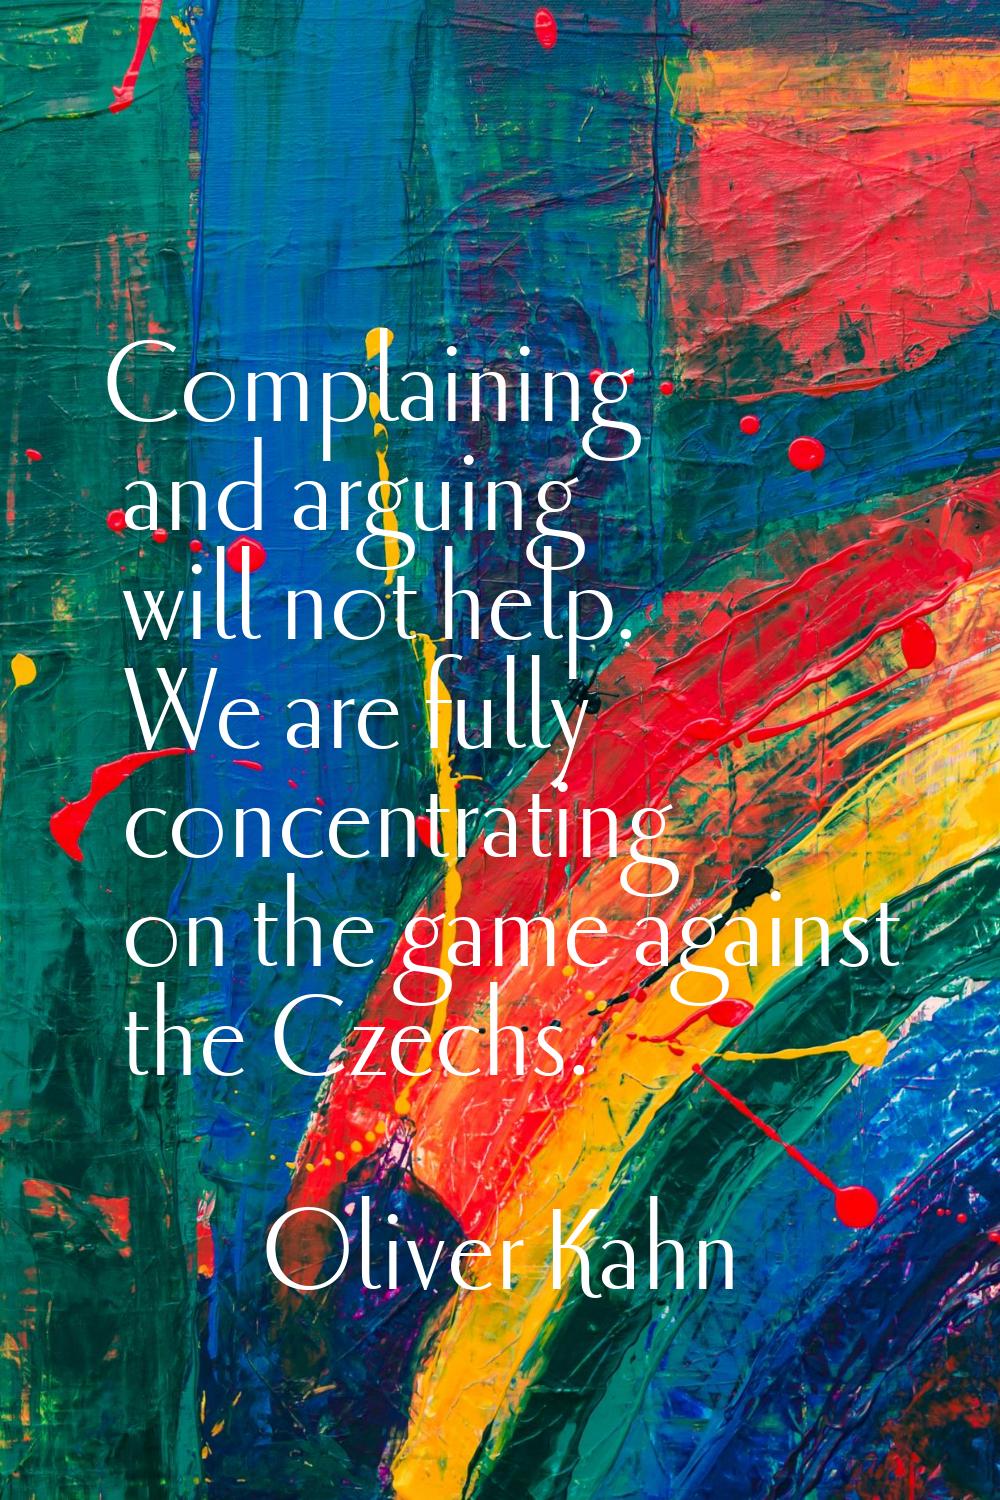 Complaining and arguing will not help. We are fully concentrating on the game against the Czechs.